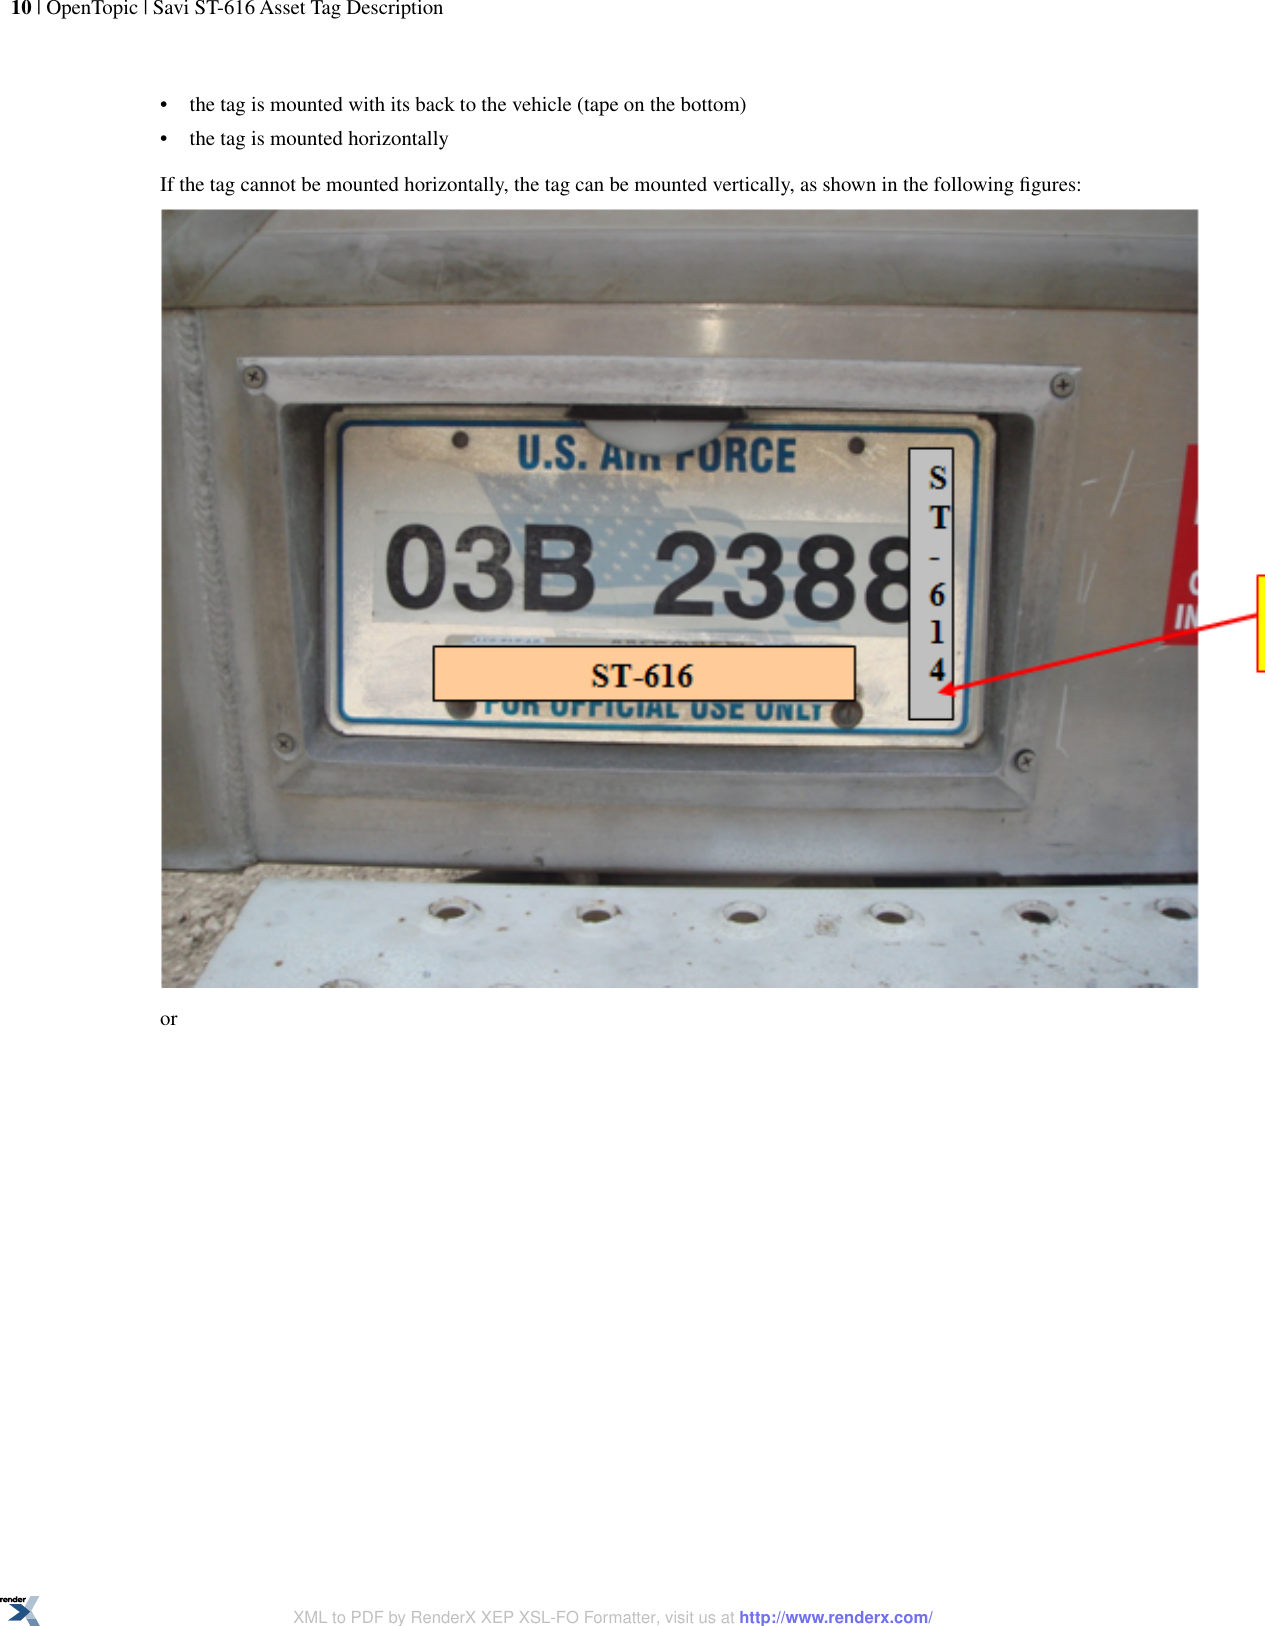 •the tag is mounted with its back to the vehicle (tape on the bottom)•the tag is mounted horizontallyIf the tag cannot be mounted horizontally, the tag can be mounted vertically, as shown in the following ﬁgures:or10 | OpenTopic | Savi ST-616 Asset Tag DescriptionXML to PDF by RenderX XEP XSL-FO Formatter, visit us at http://www.renderx.com/